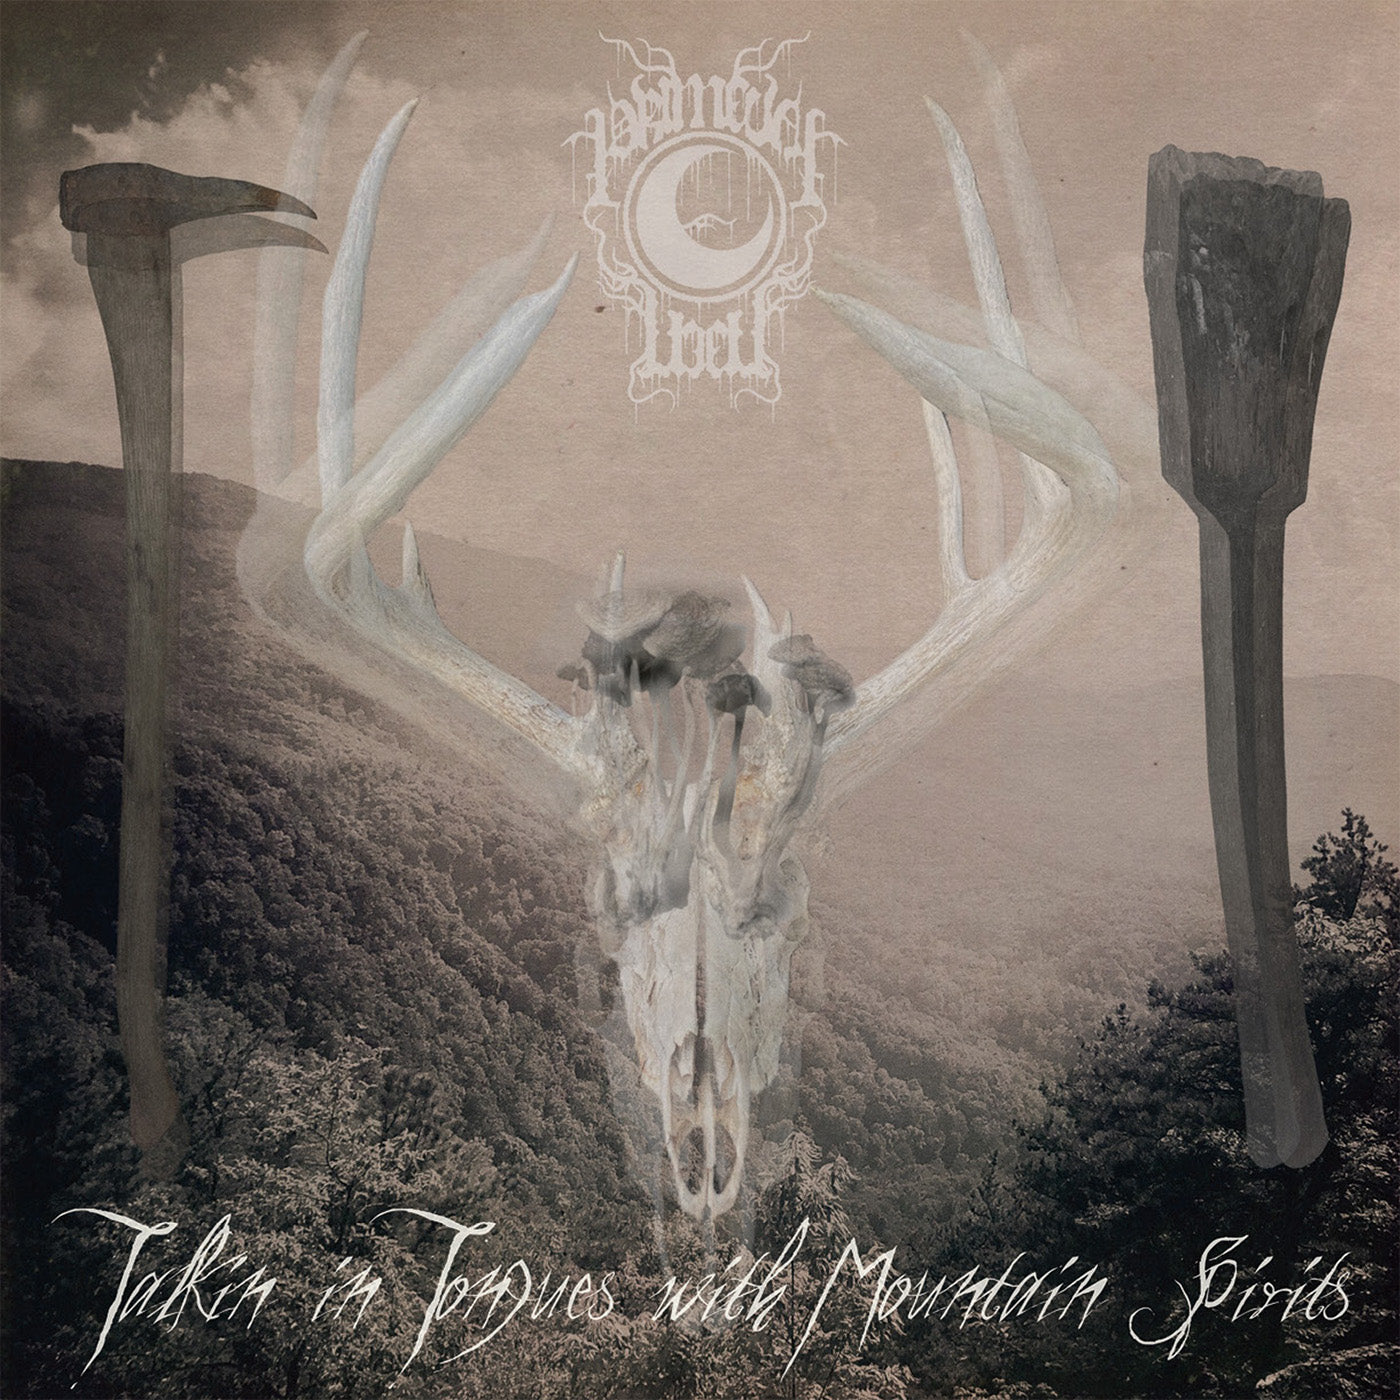 Primeval Well – Talkin’ in Tongues with Mountain Spirits 2LP